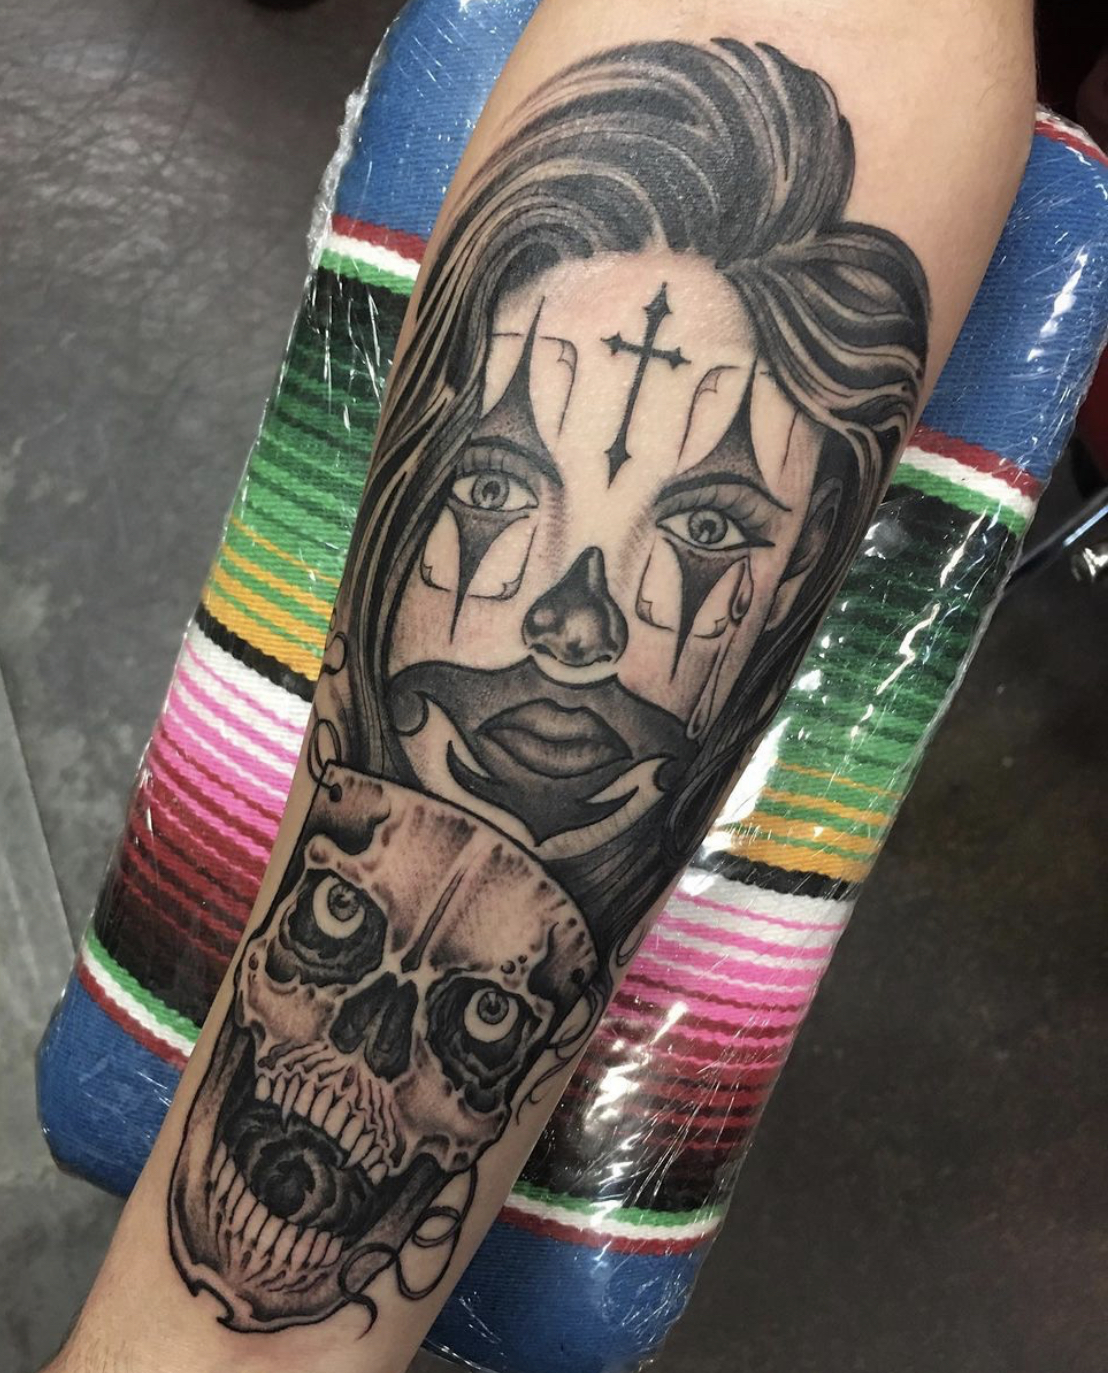 Face and skull tattoo from local shop in Dallas Texas